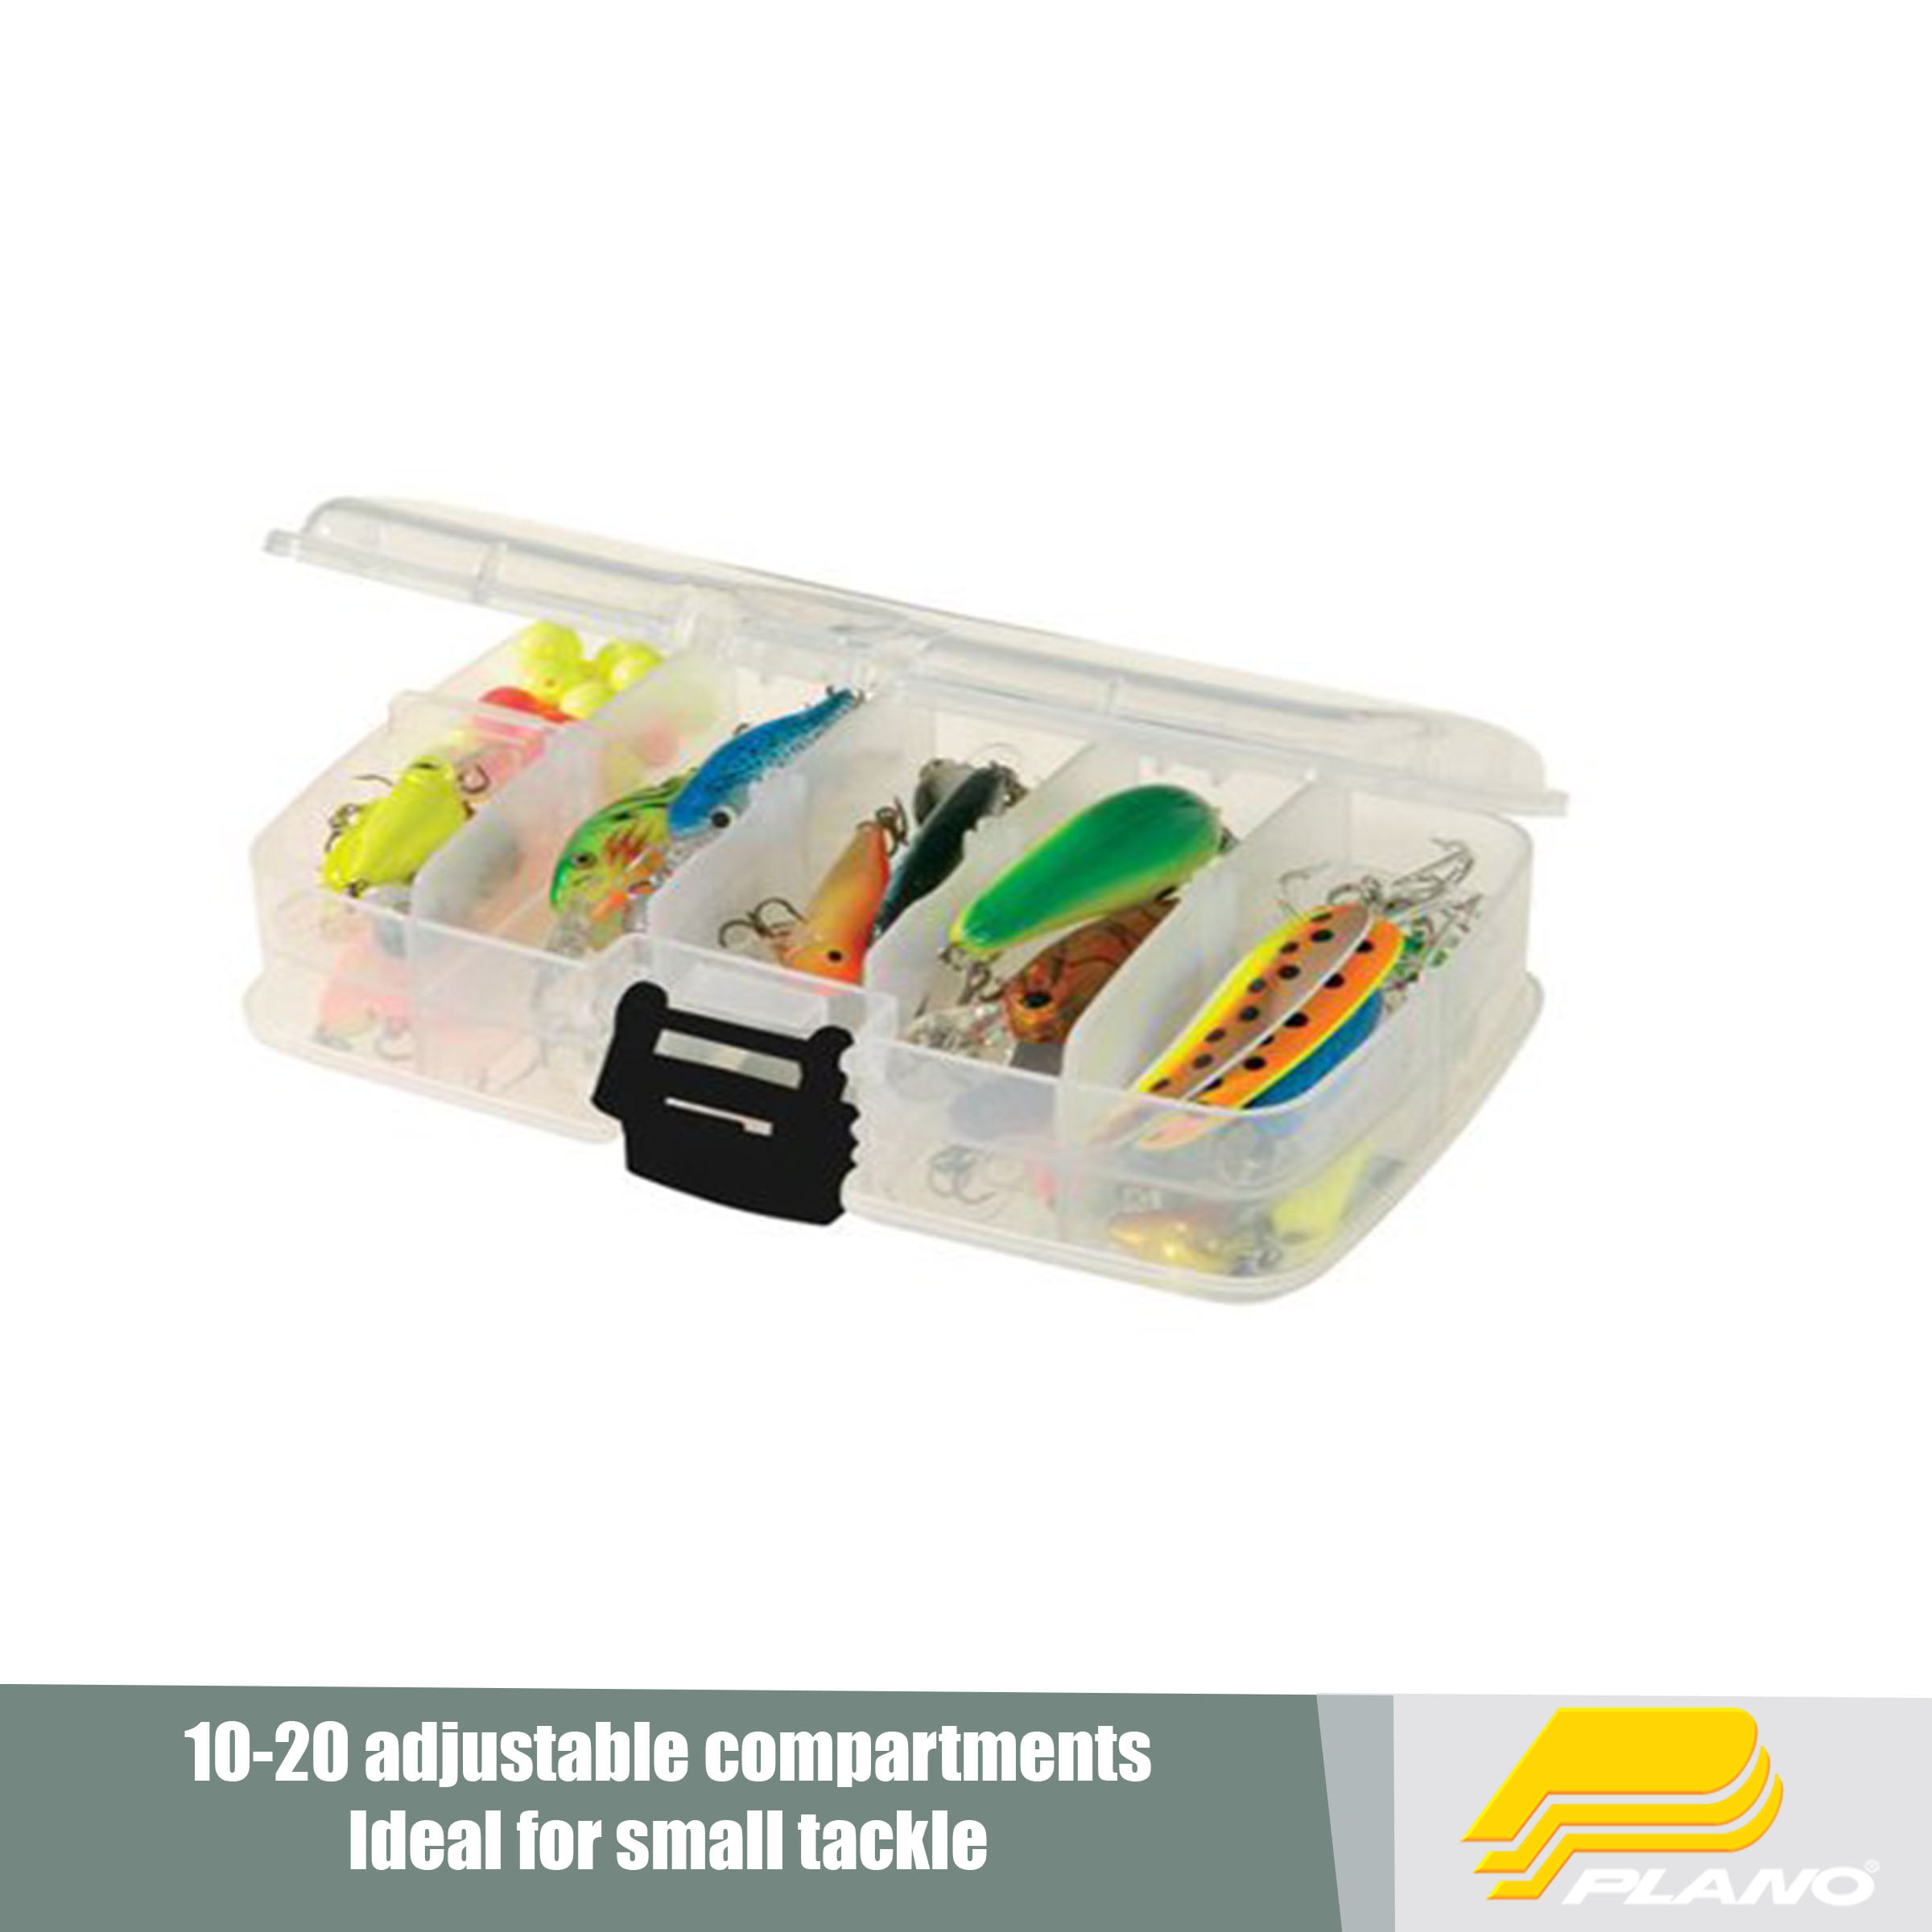 Double Layer Tackle Box, Two Level Fishing Tackle Box Organizer with  Adjustable Dividers, Outdoor Fishing Large Capacity Tackle Storage Box  14.2”x9.8”x4.7” 